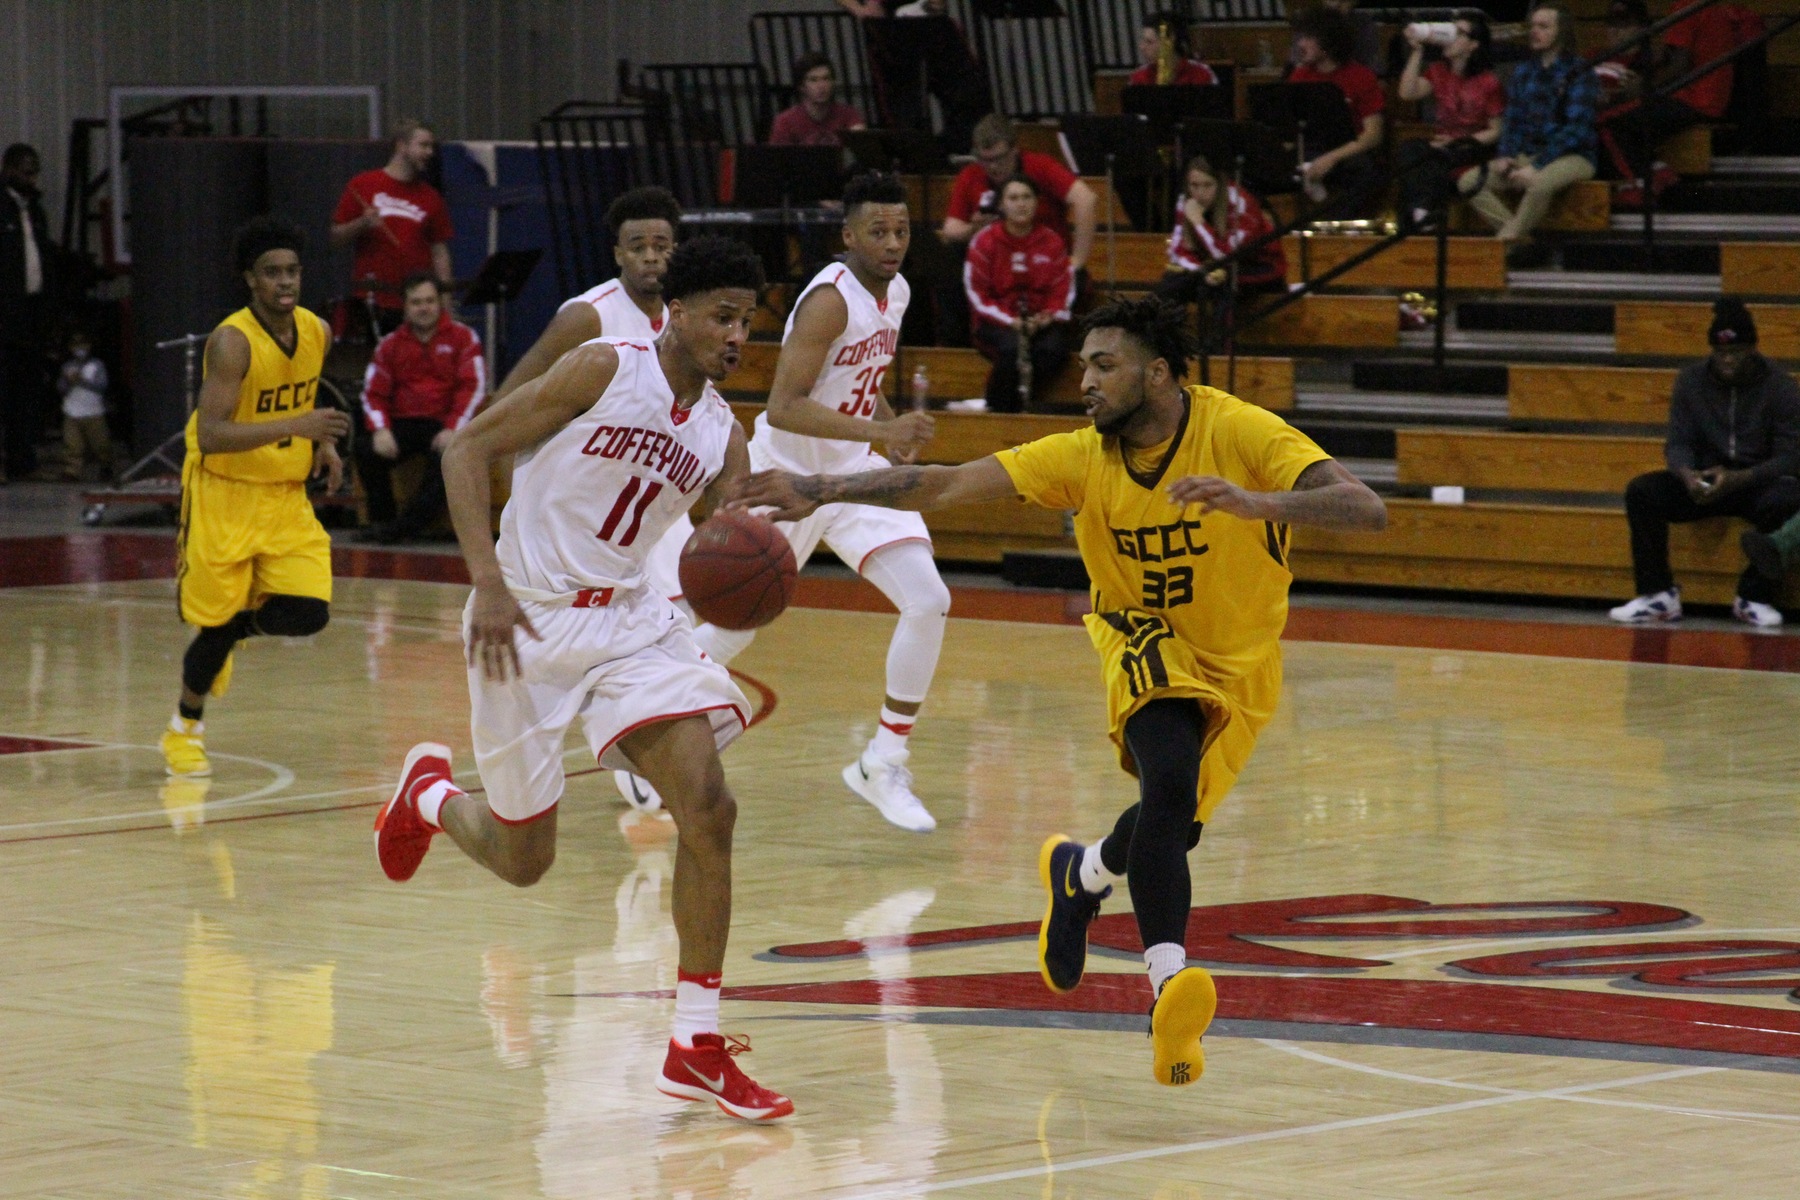 Coffeyville storms back to beat Garden City